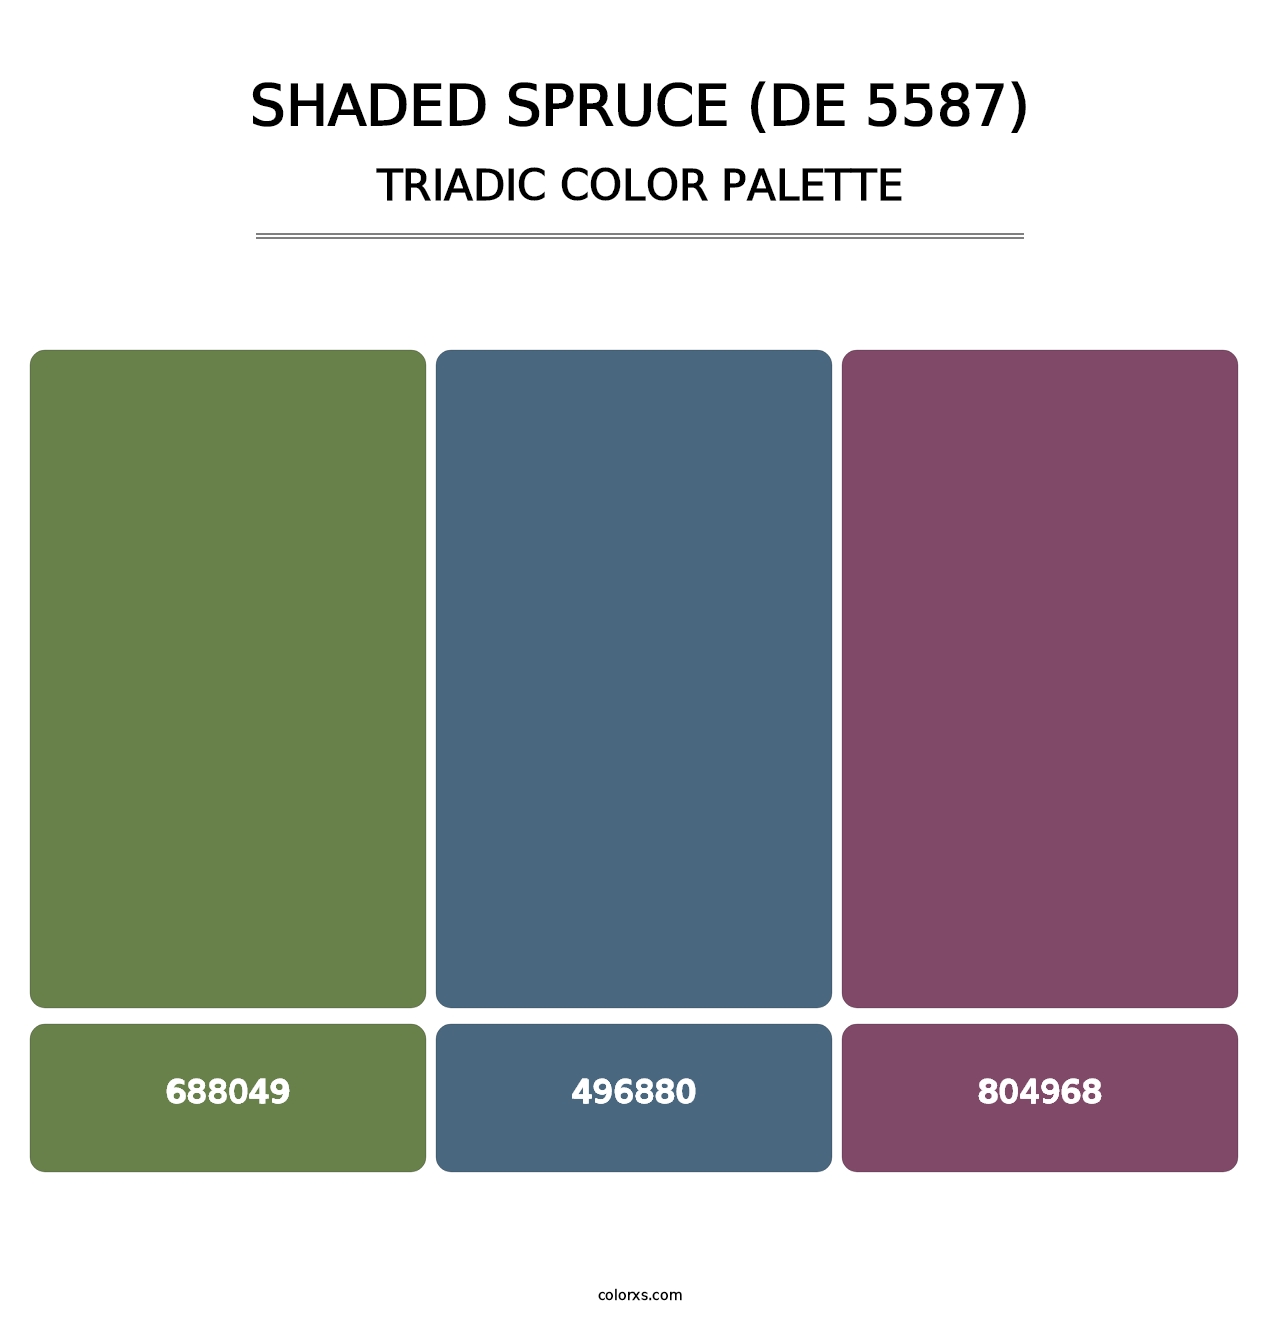 Shaded Spruce (DE 5587) - Triadic Color Palette